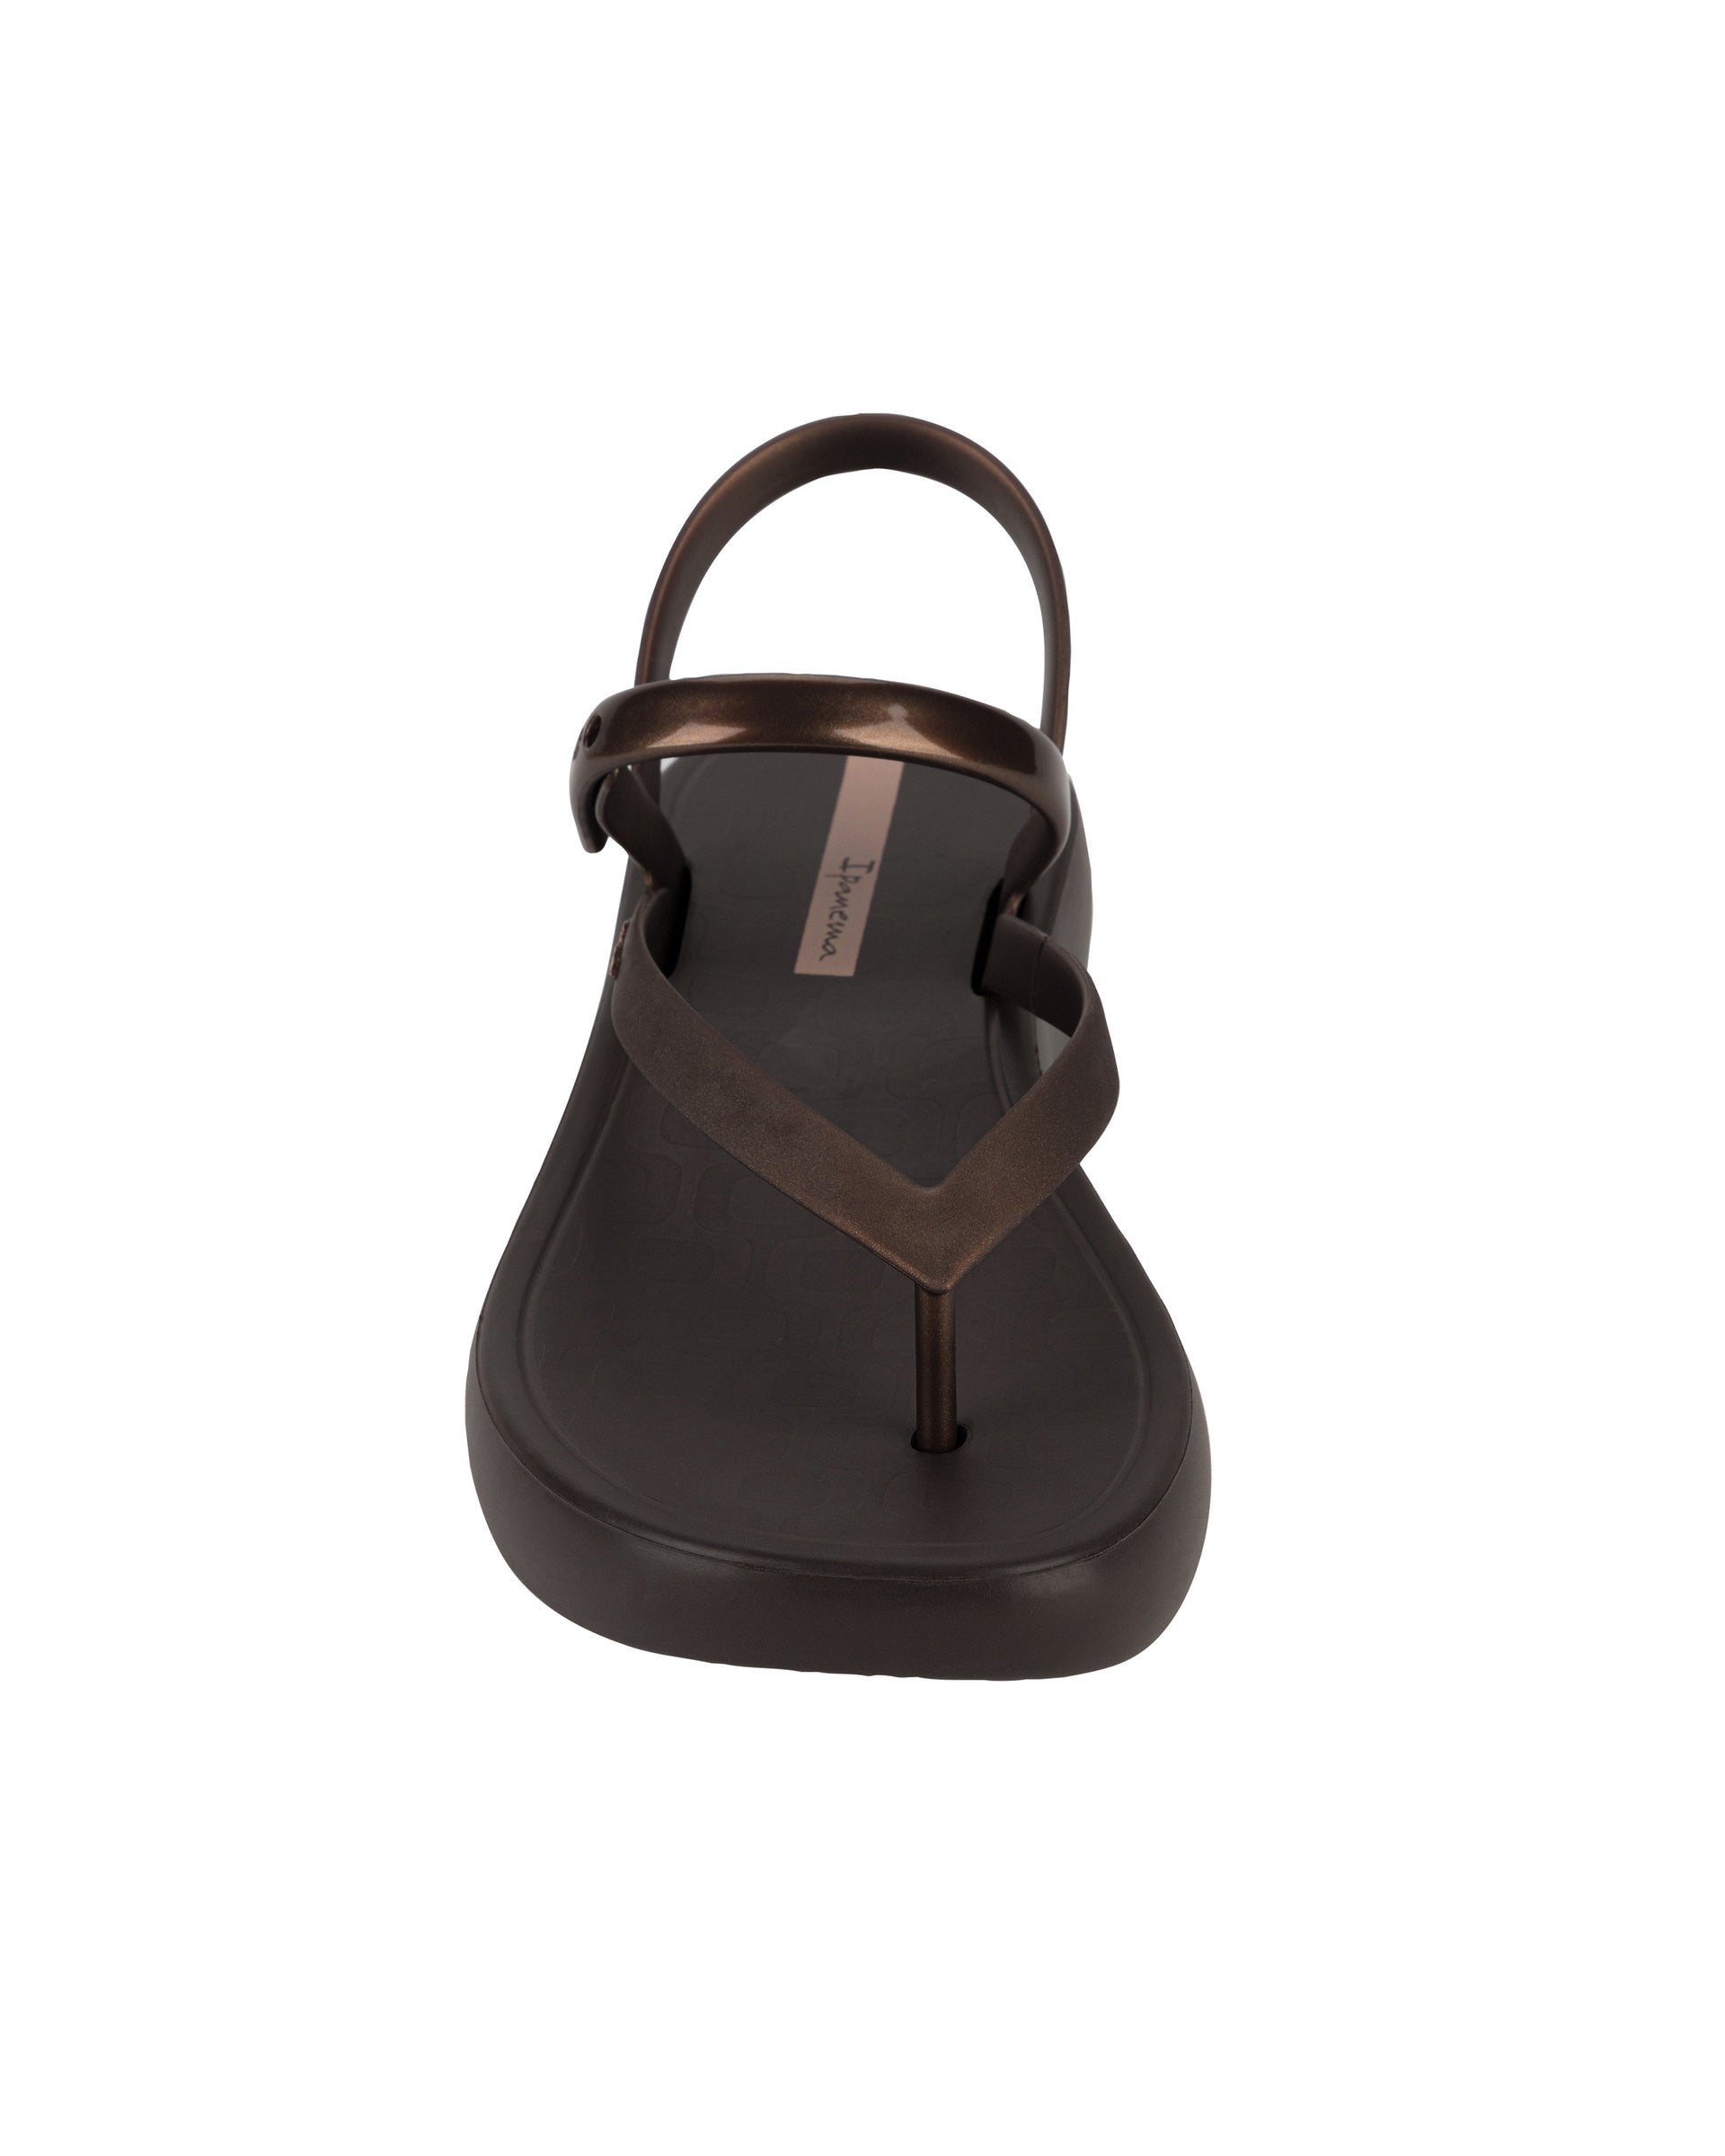 Front view of a brown Ipanema Verano women's sandal.